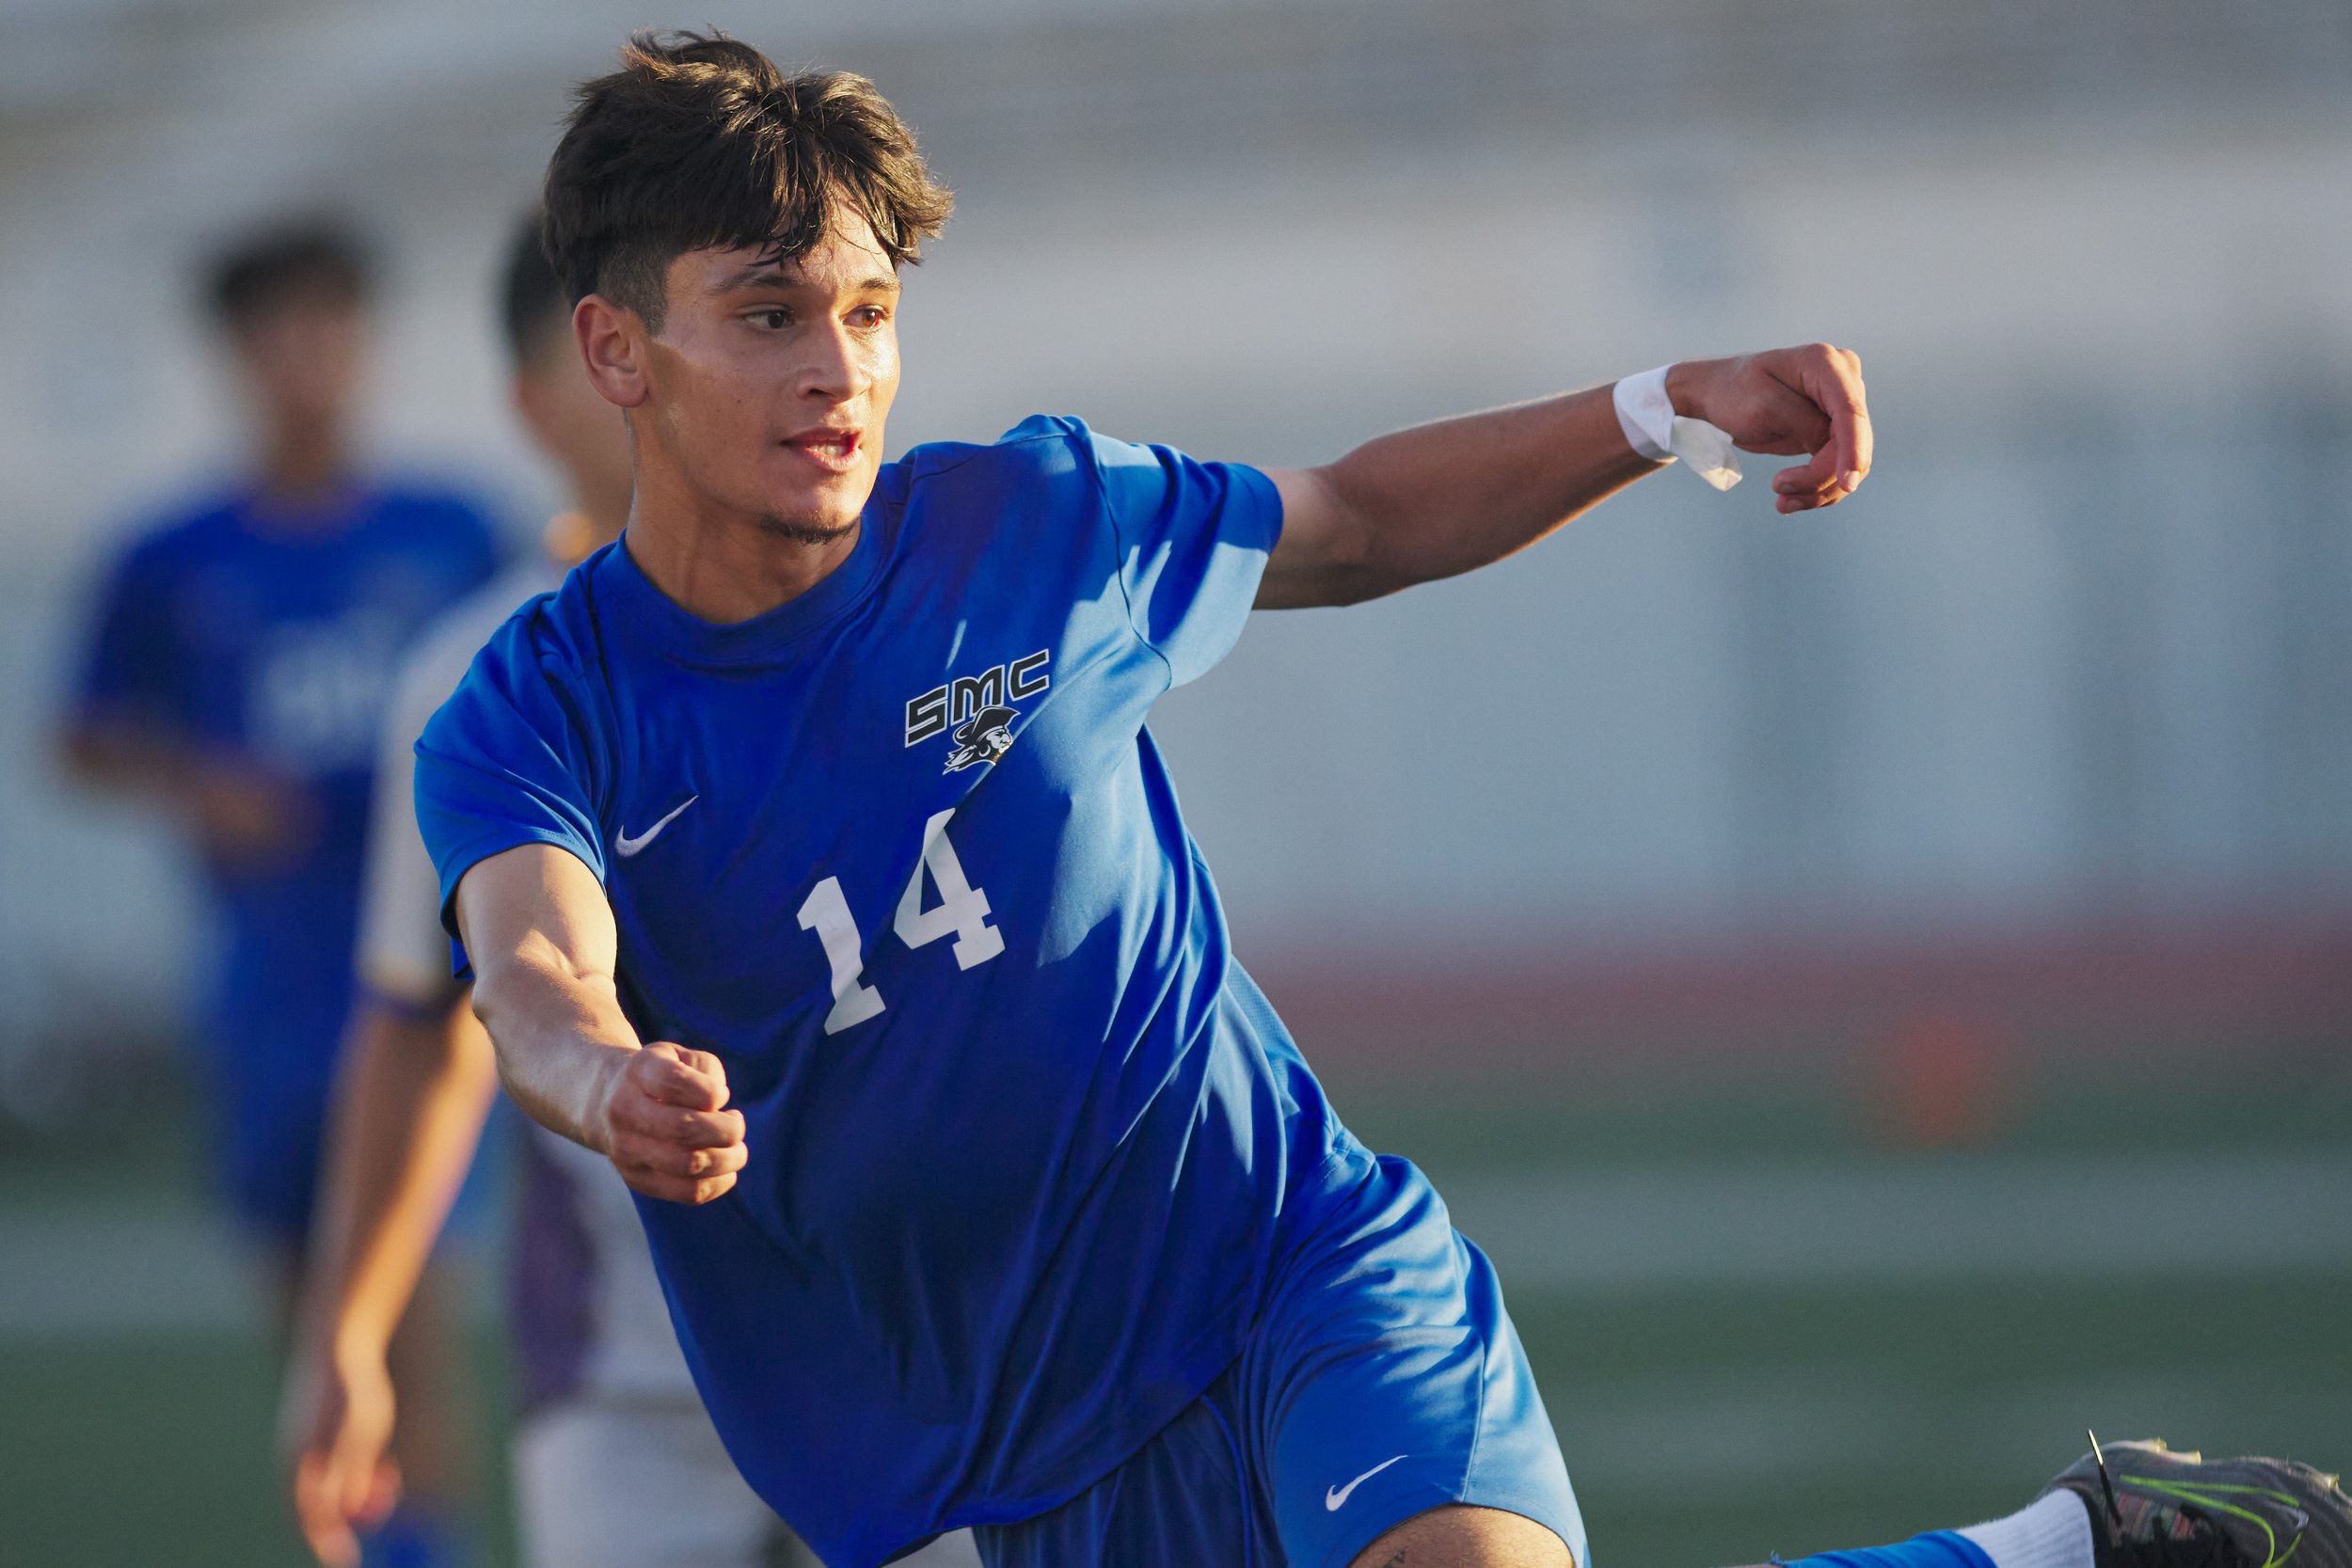  Santa Monica College Corsairs midfielder Jose Urdiano executes his penalty kick during the men's soccer game against the Allan Hancock College Bulldogs on Tuesday, Nov. 7, 2023, at Corsair Field in Santa Monica, Calif. The Corsairs won 7-0. (Nichola